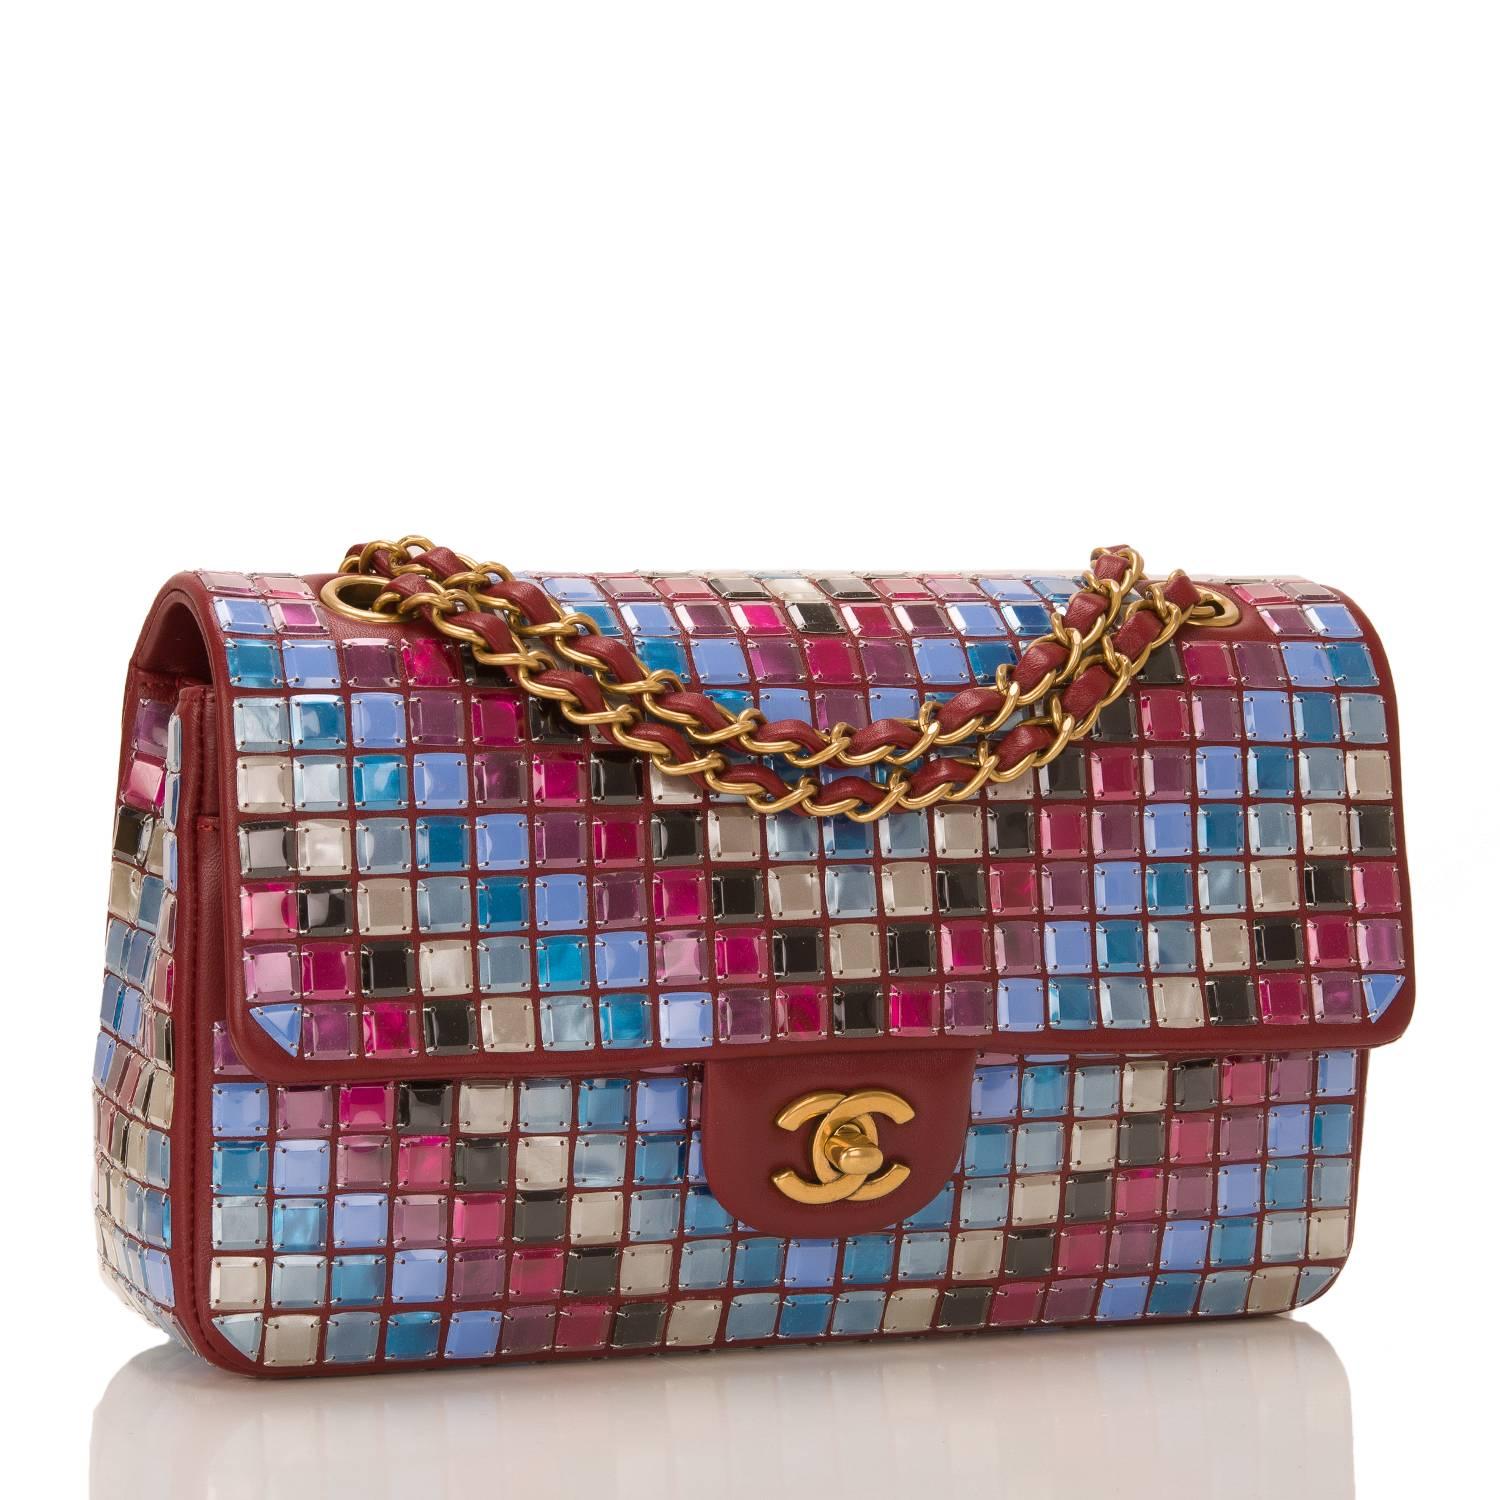 Chanel runway Red Multicolor Lambskin Medium Flap Bag with Mosaic Embroideries by Lesage with gold tone hardware

The bag features allover mosaic embellishments of reds, pinks, blues, white, and black inn a diagonal pattern on red lambskin leather